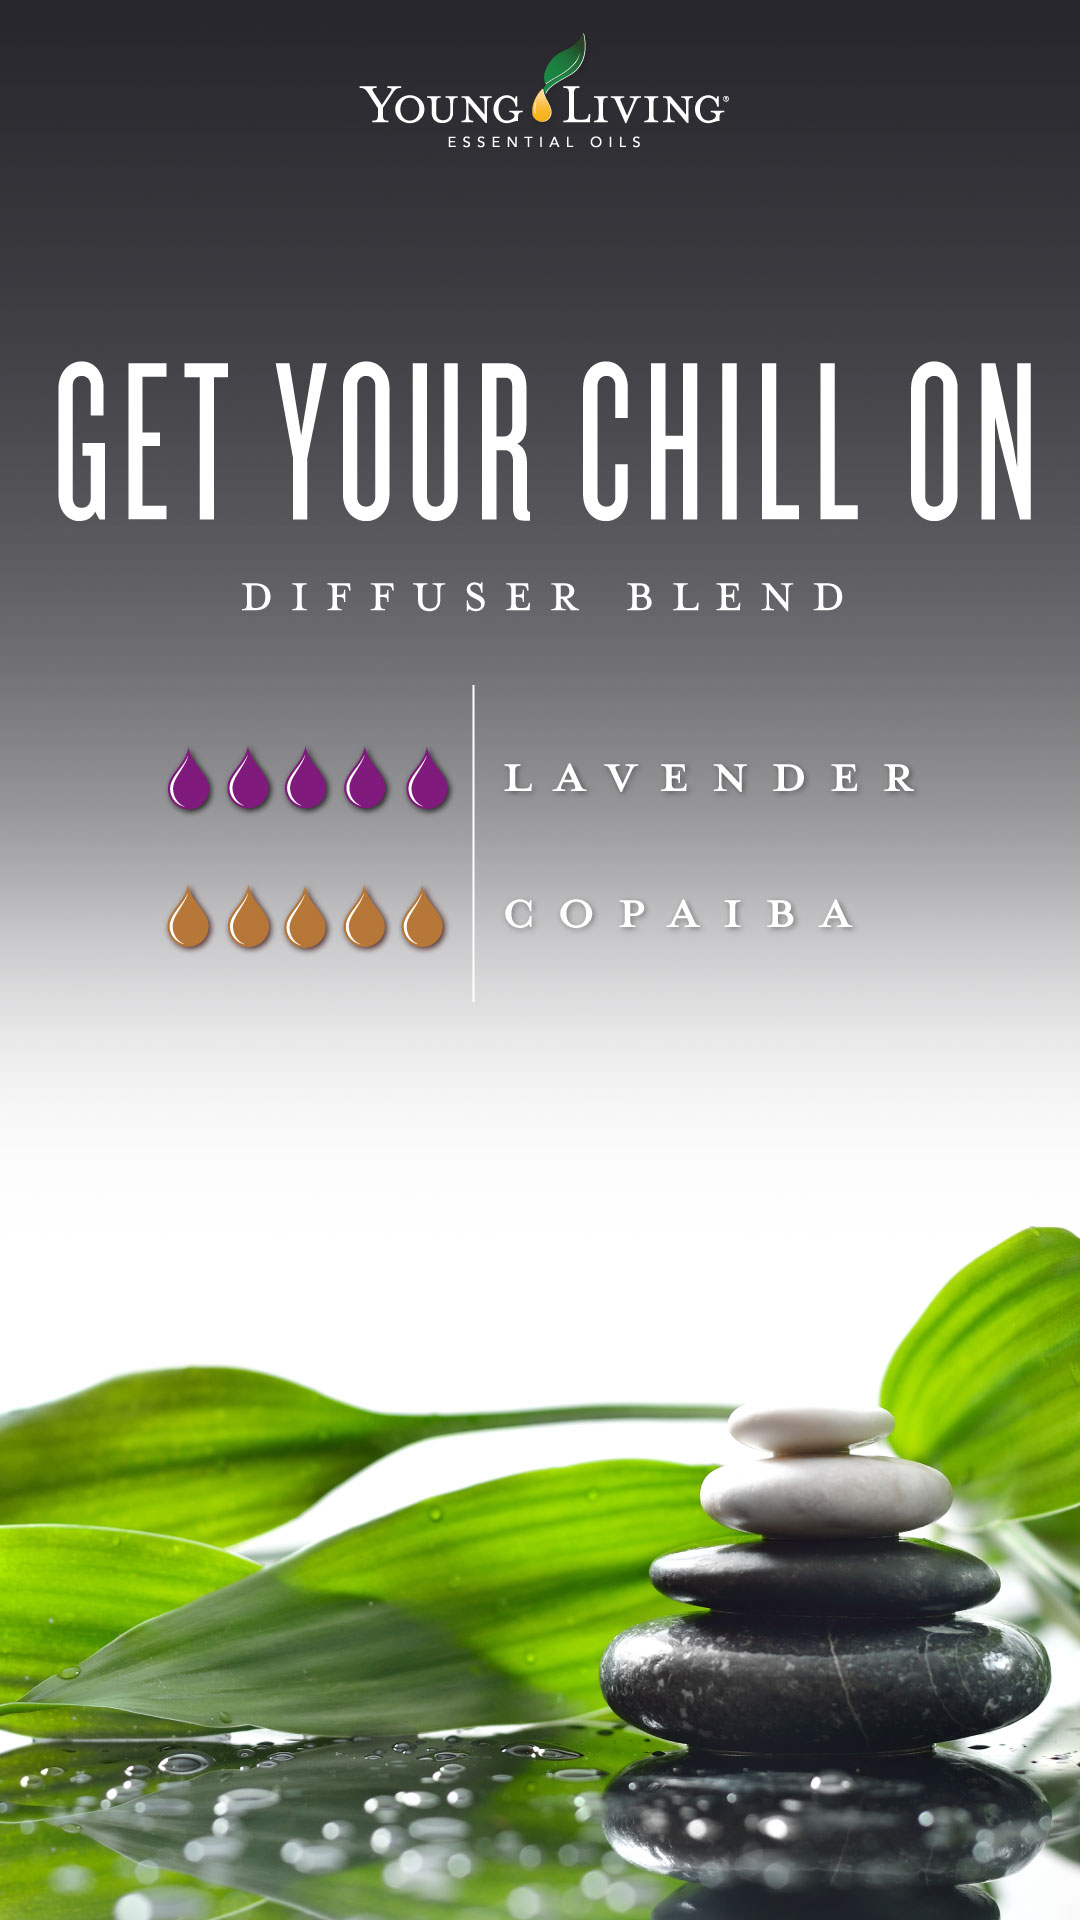 Get your chill on Diffuser Blend